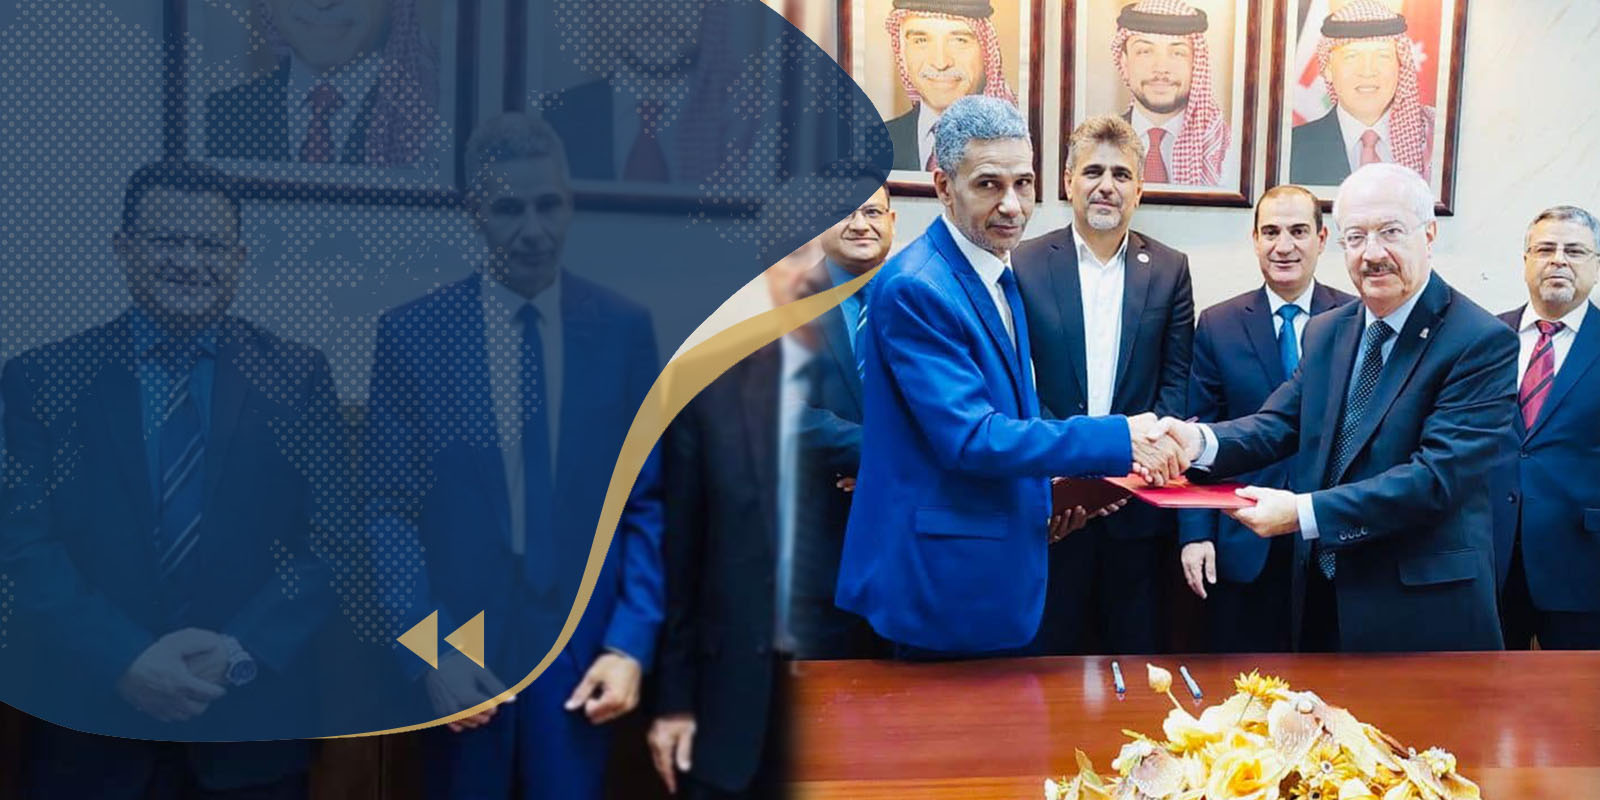 A signing of academic agreement for mutual collaborations between Sirte University and Mut”aa University in Jordan